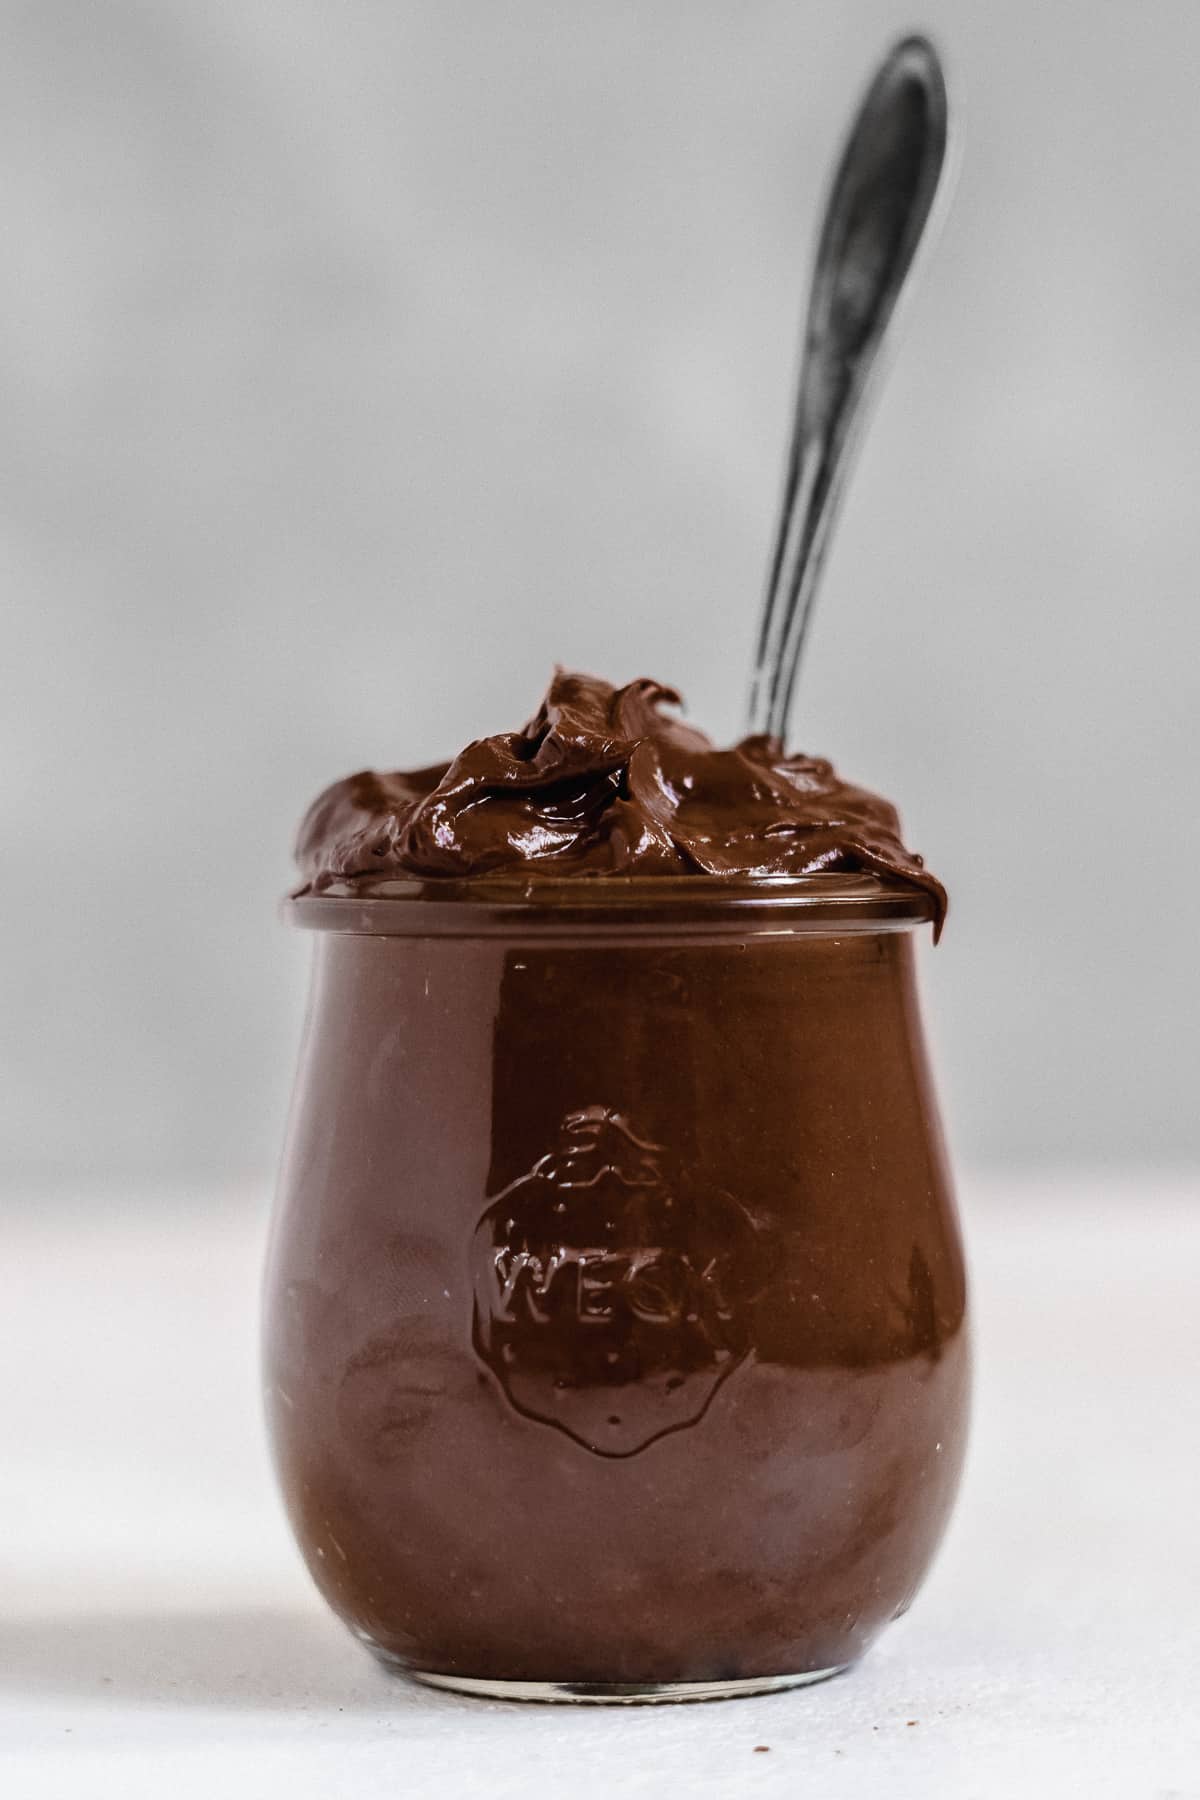 Jar overflowing with chocolate frosting with a spoon on a grey background.